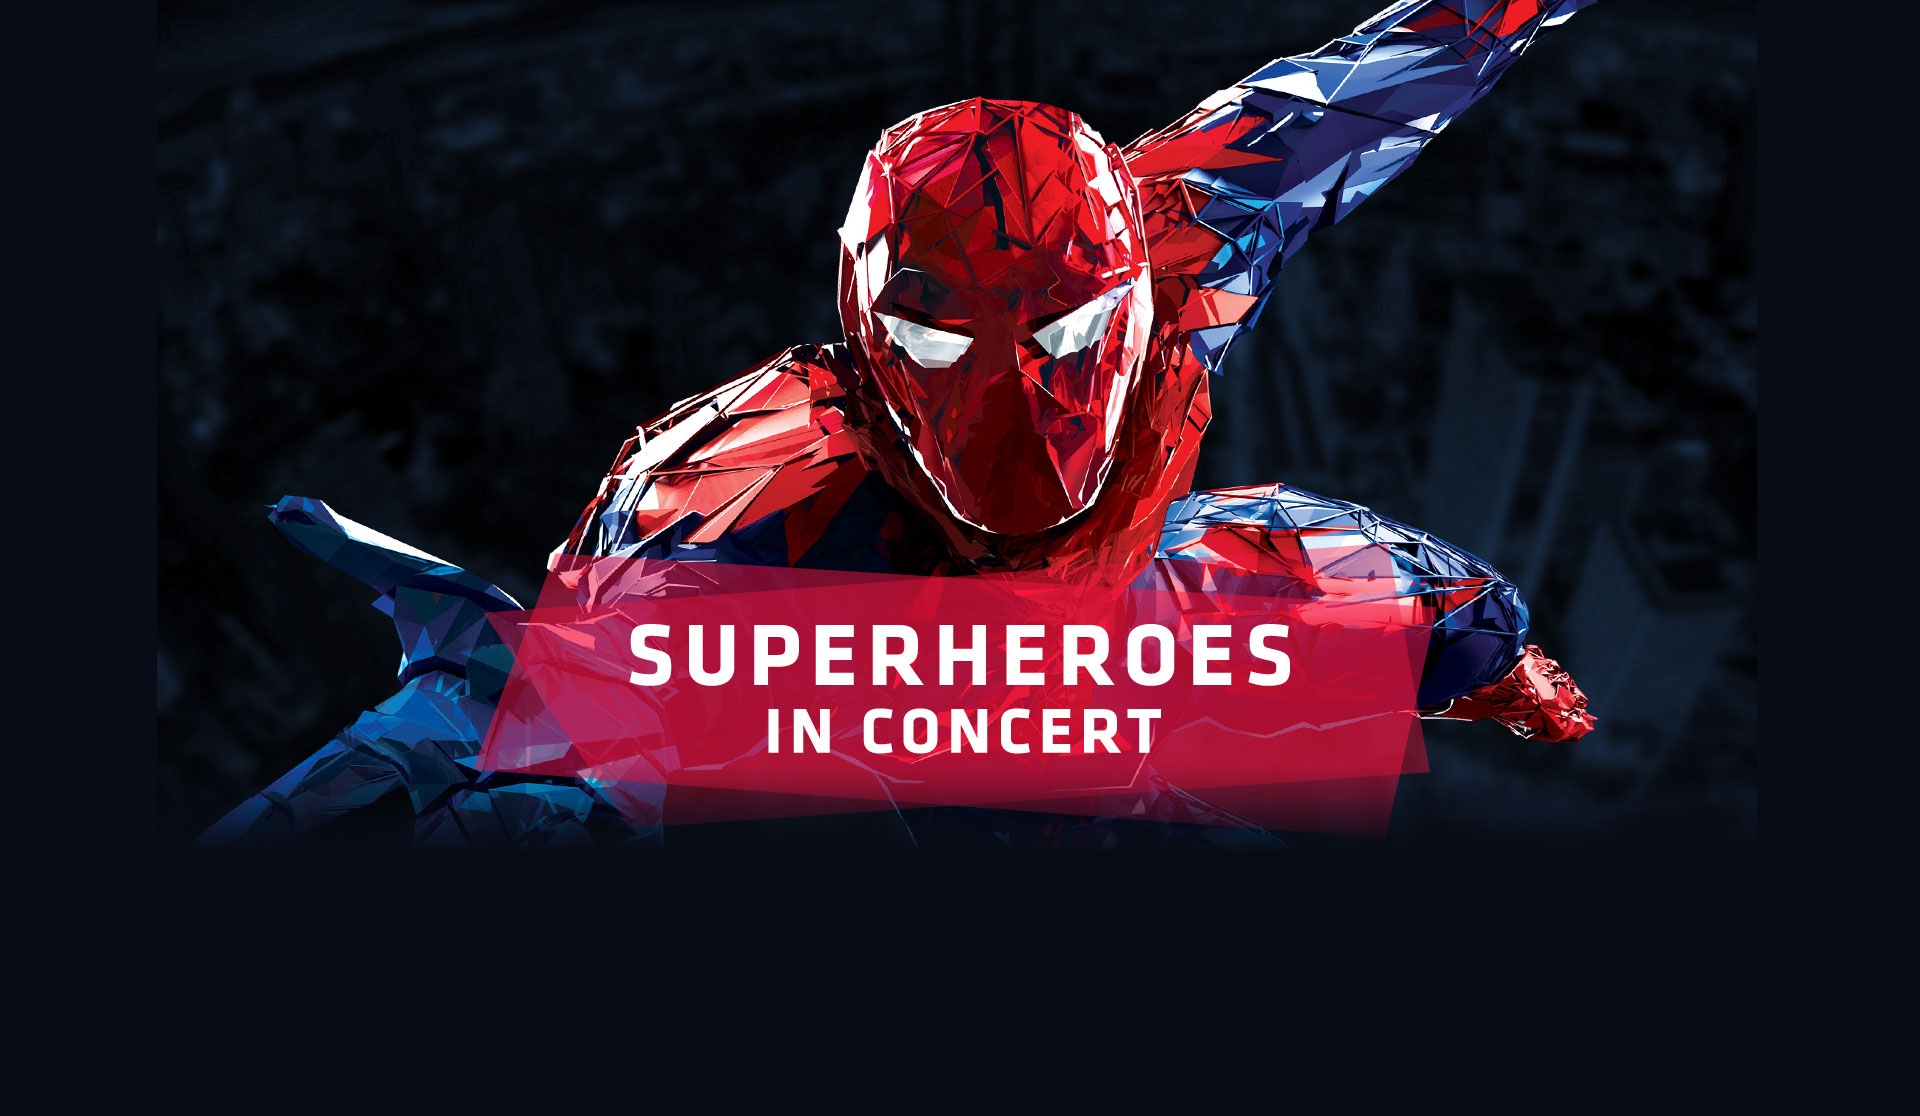 29.04.2017 – Superheroes in Concert, Cracow